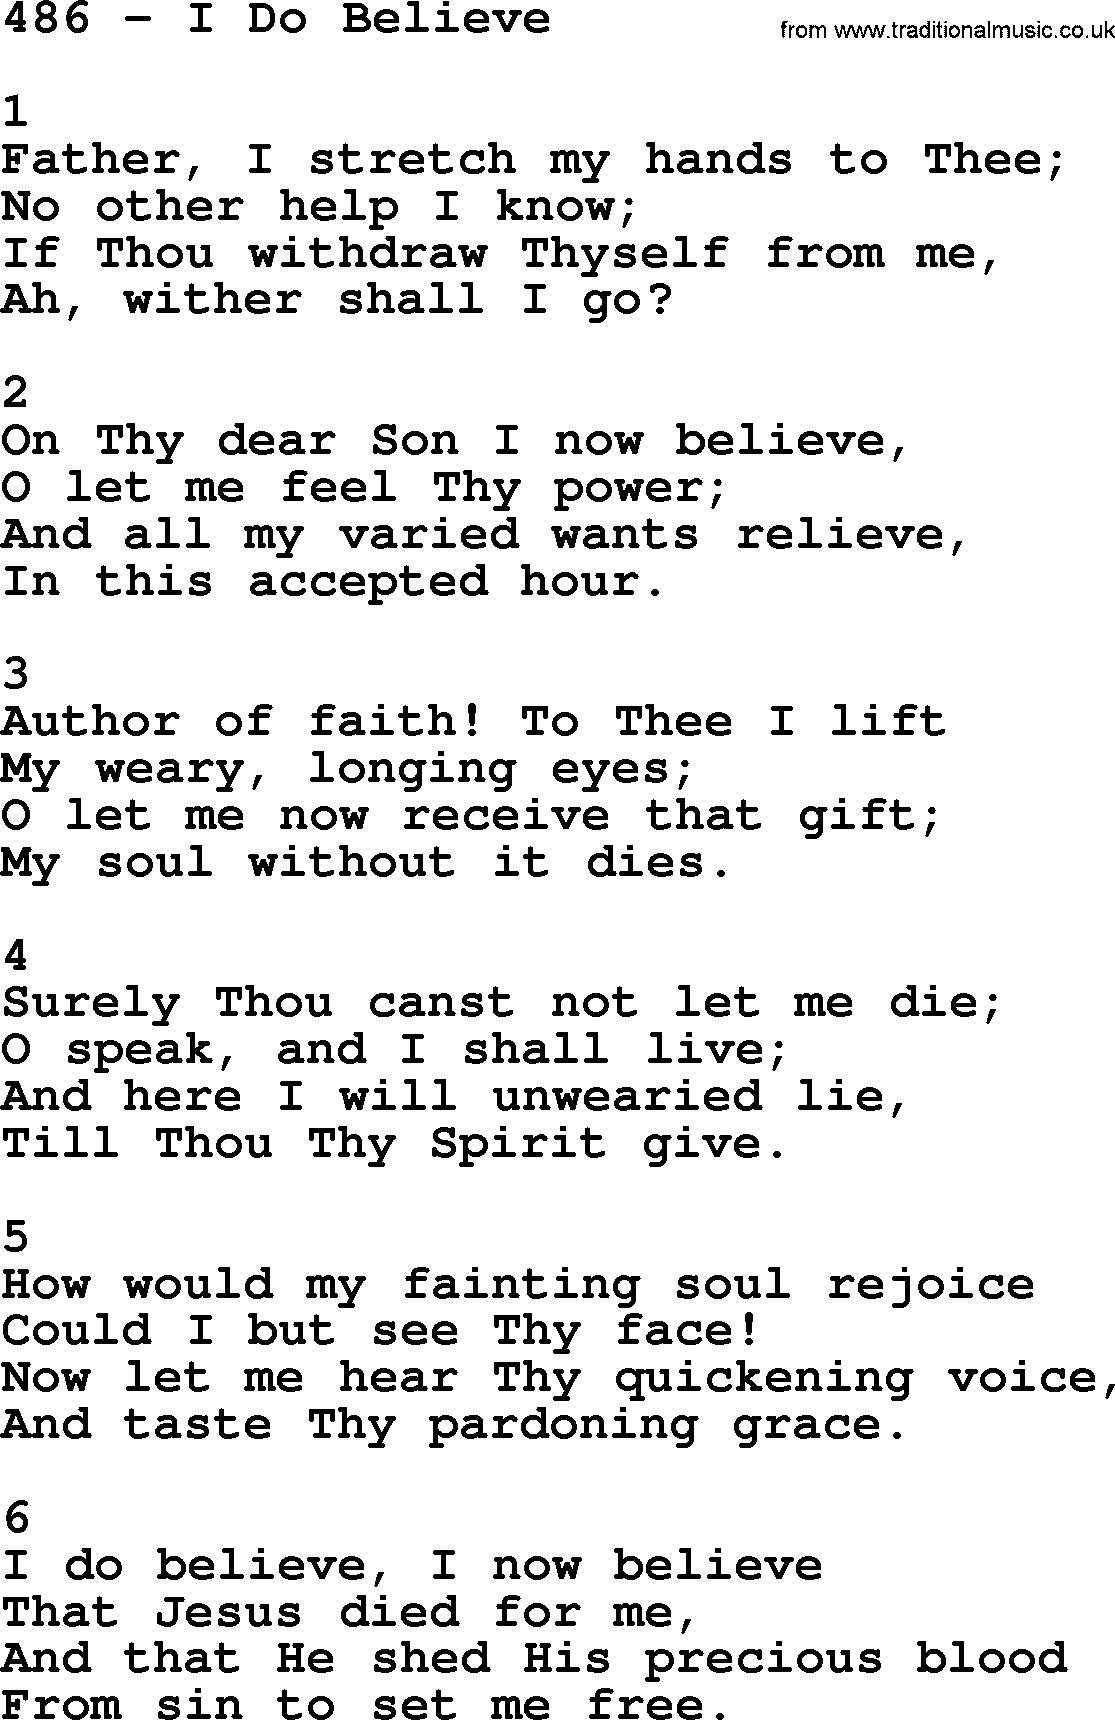 Complete Adventis Hymnal, title: 486-I Do Believe, with lyrics, midi, mp3, powerpoints(PPT) and PDF,